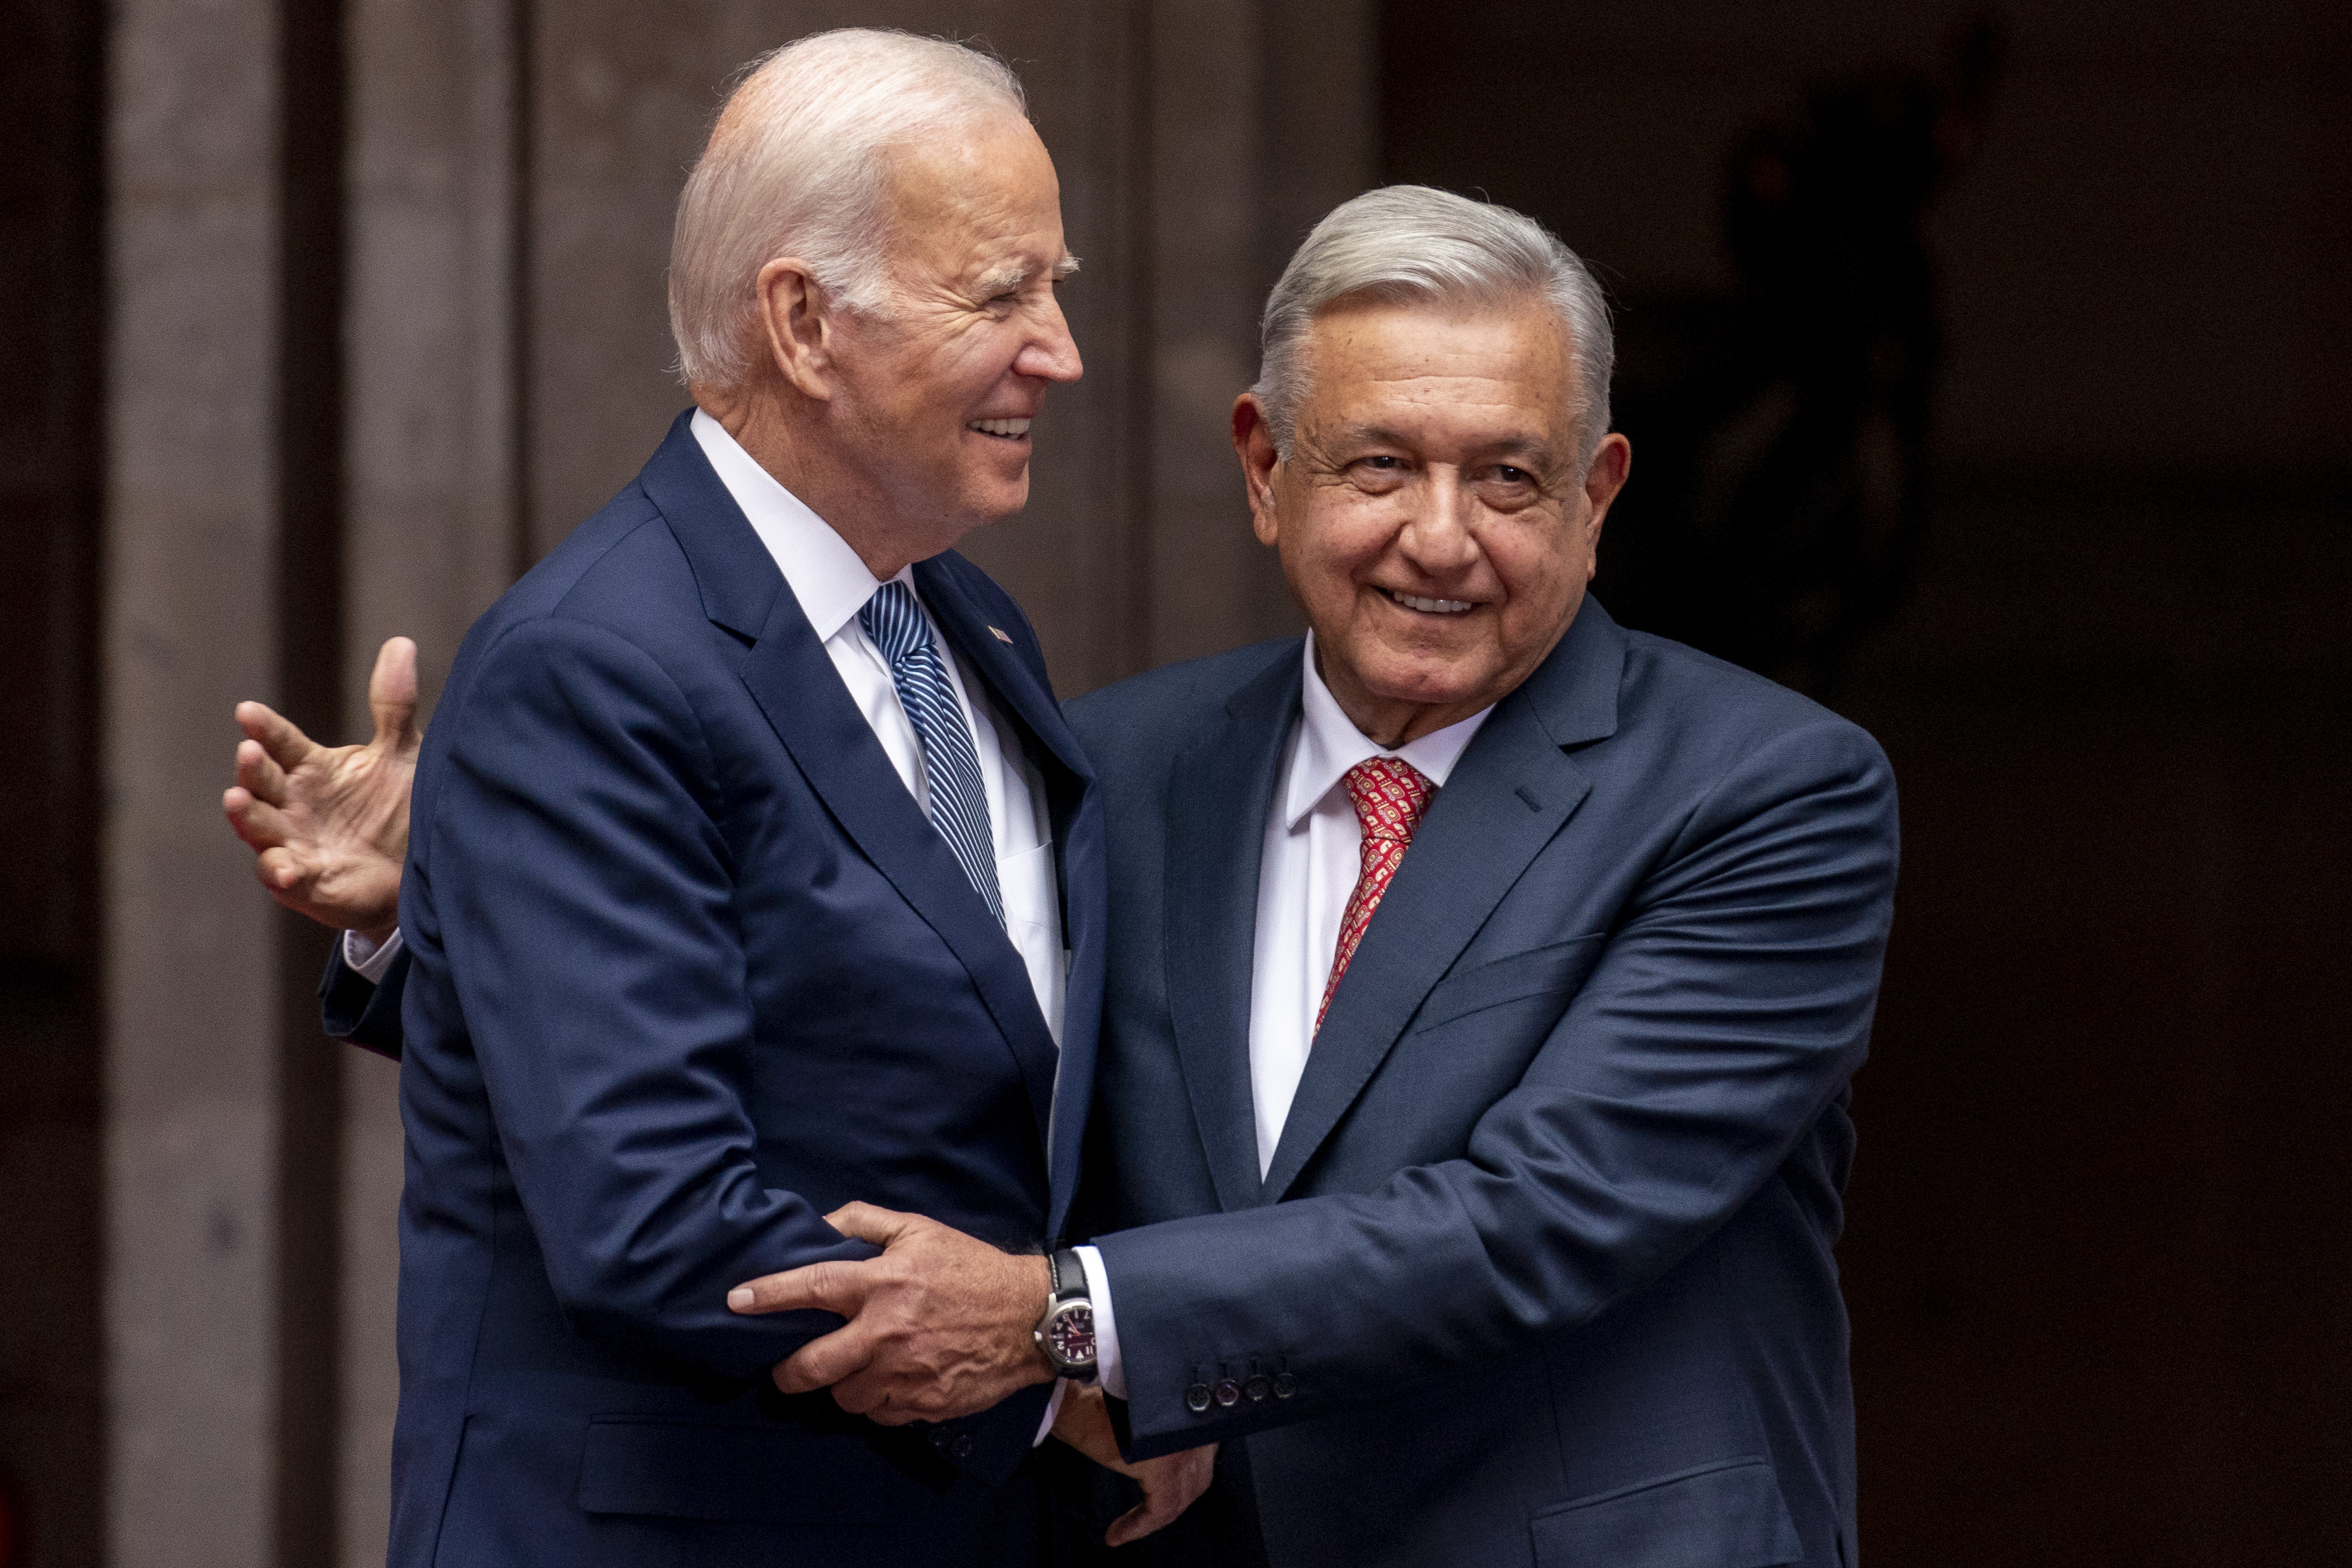 US President Joe Biden is greeted by Mexican President Andrés Manuel López Obrador upon his arrival at the National Palace in Mexico City, Mexico, Monday, Jan. 9, 2023. (AP Photo/Andrew Harnik)